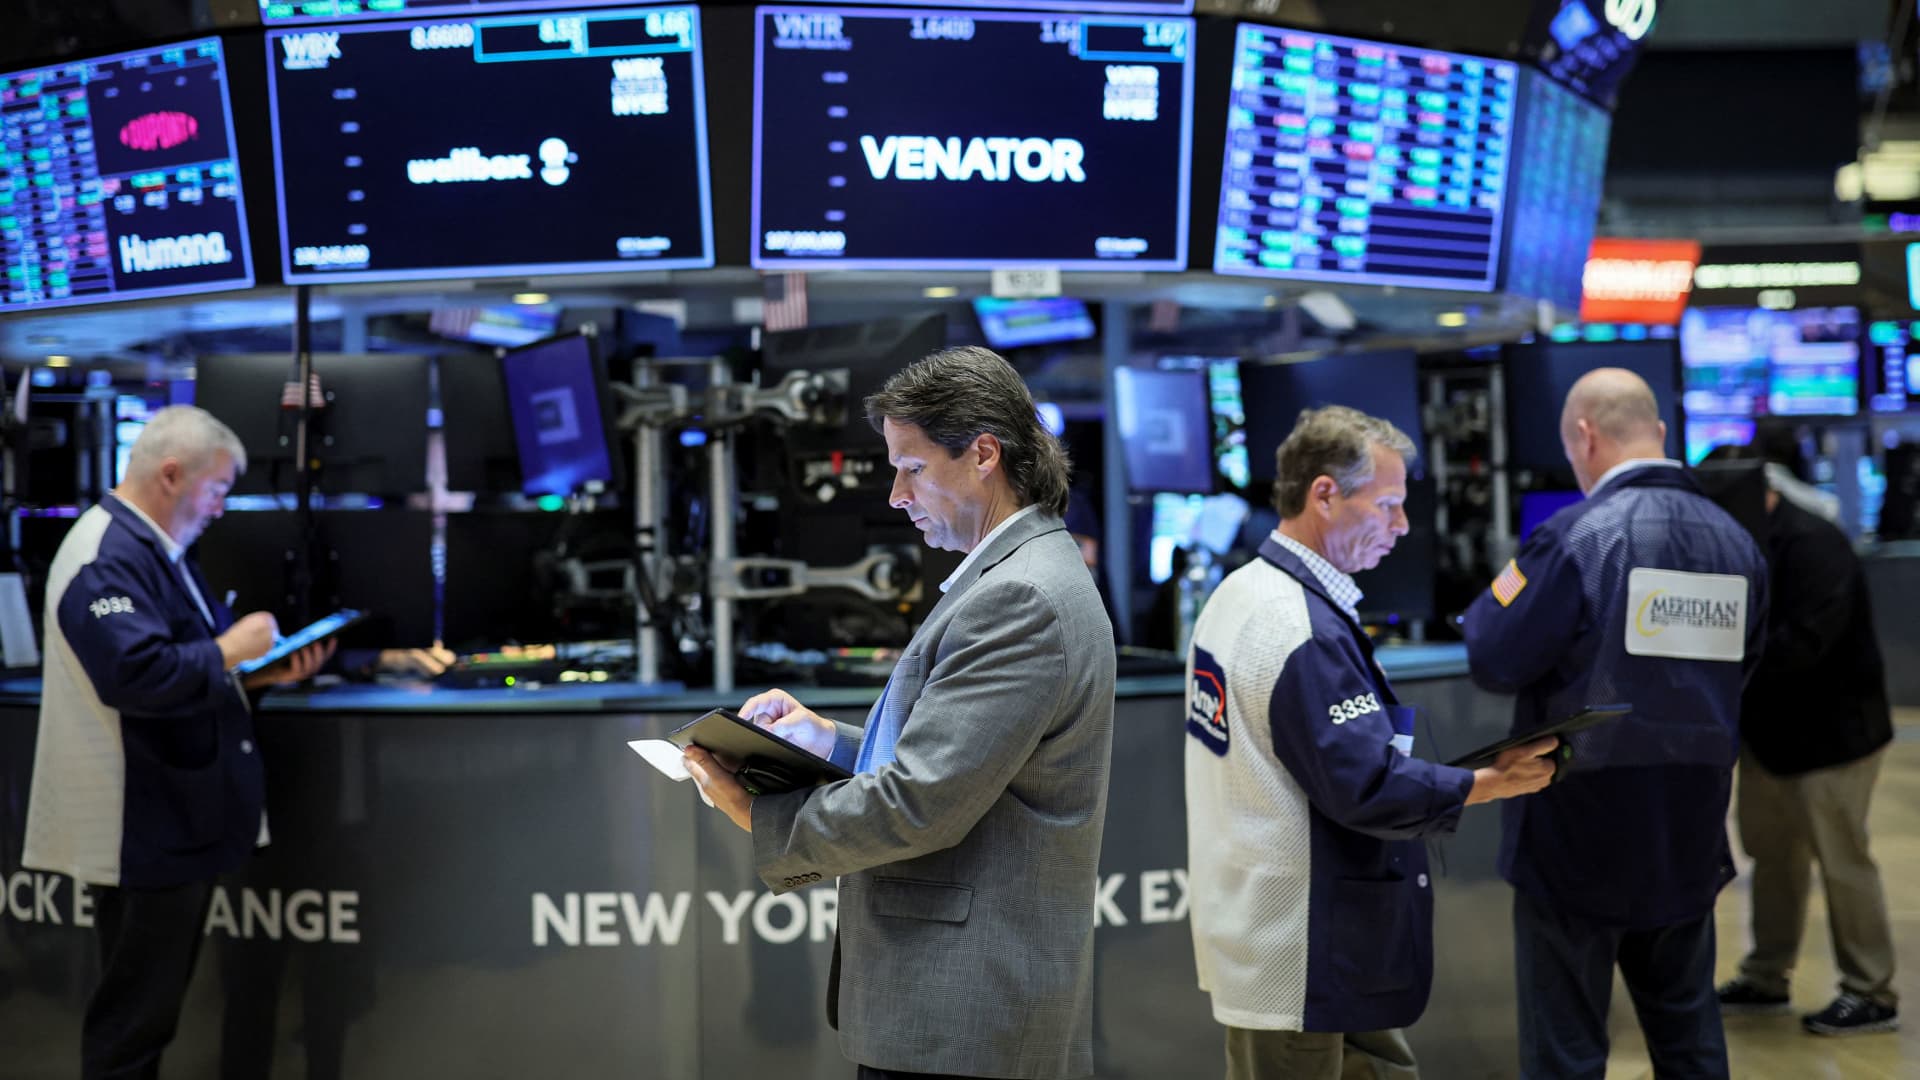 Stock futures are up slightly following Thursday’s broad sell-off